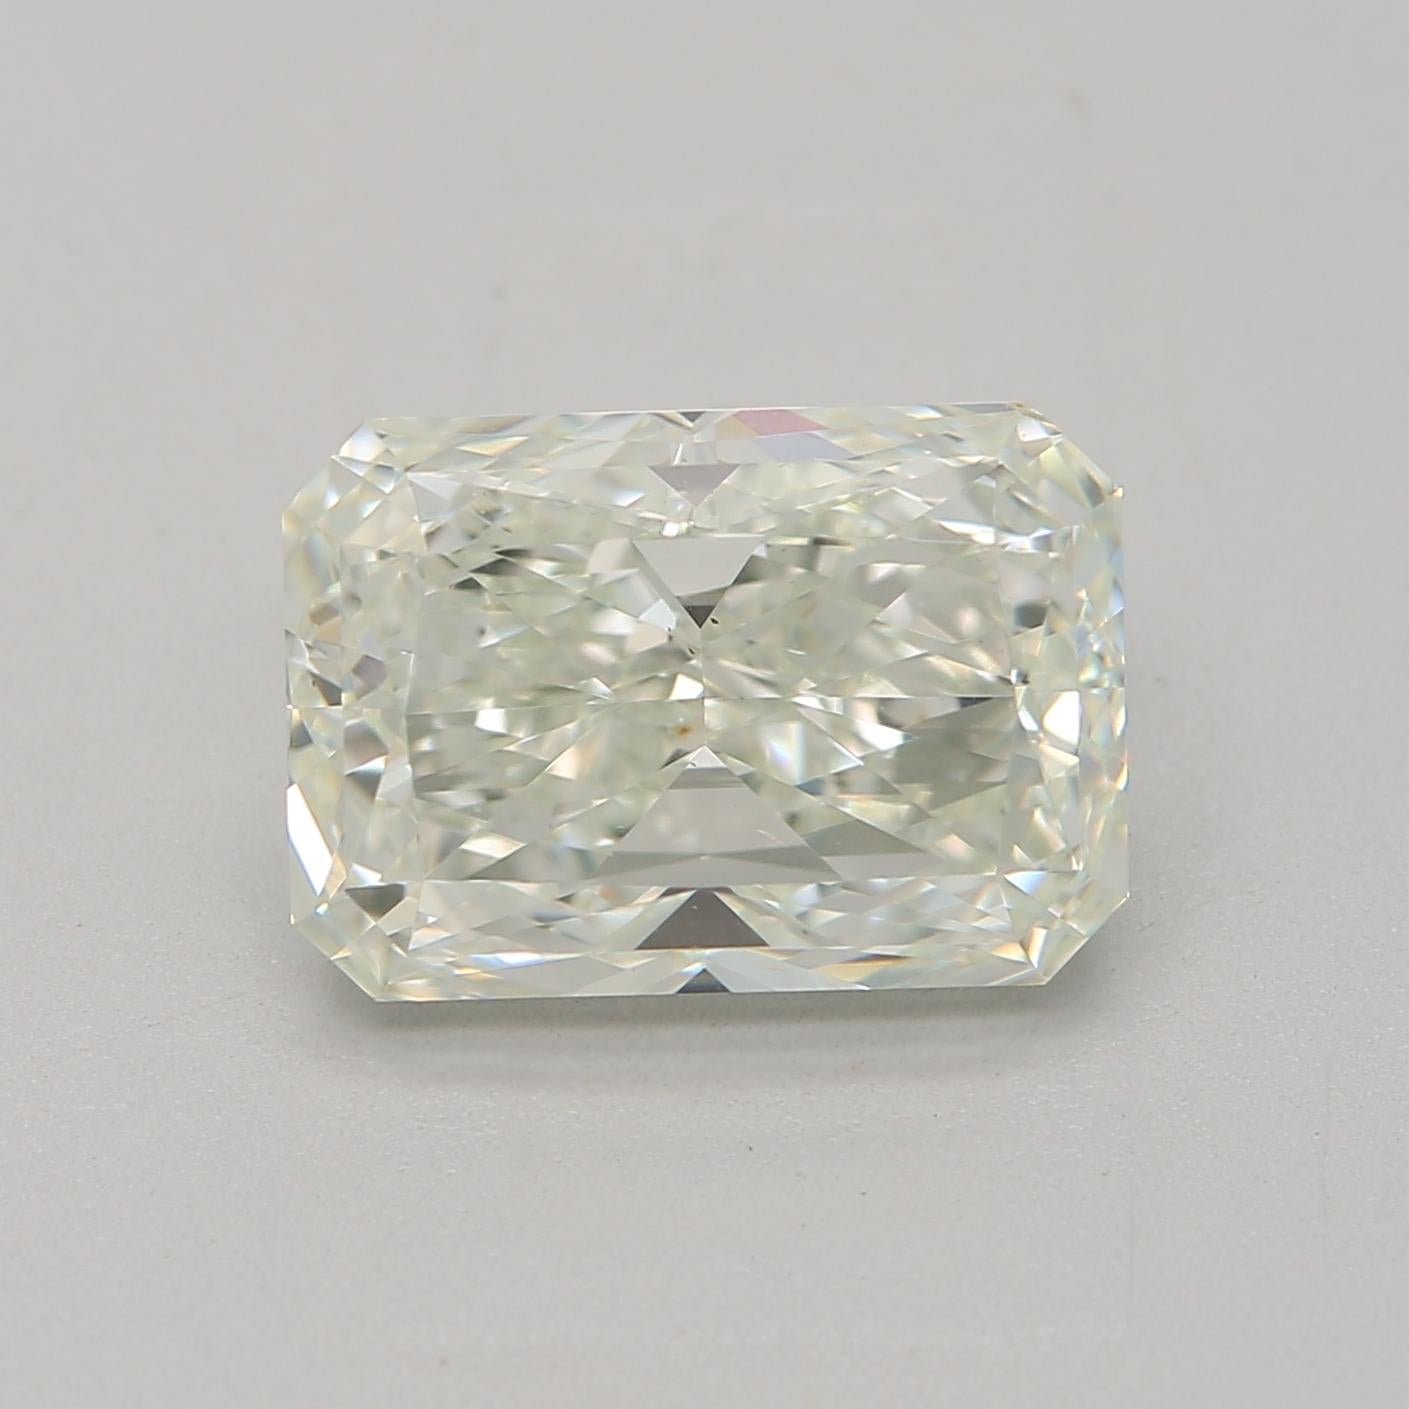 2.00 Carat Very Light Green Radiant Cut Diamond SI1 Clarity GIA Certified For Sale 2